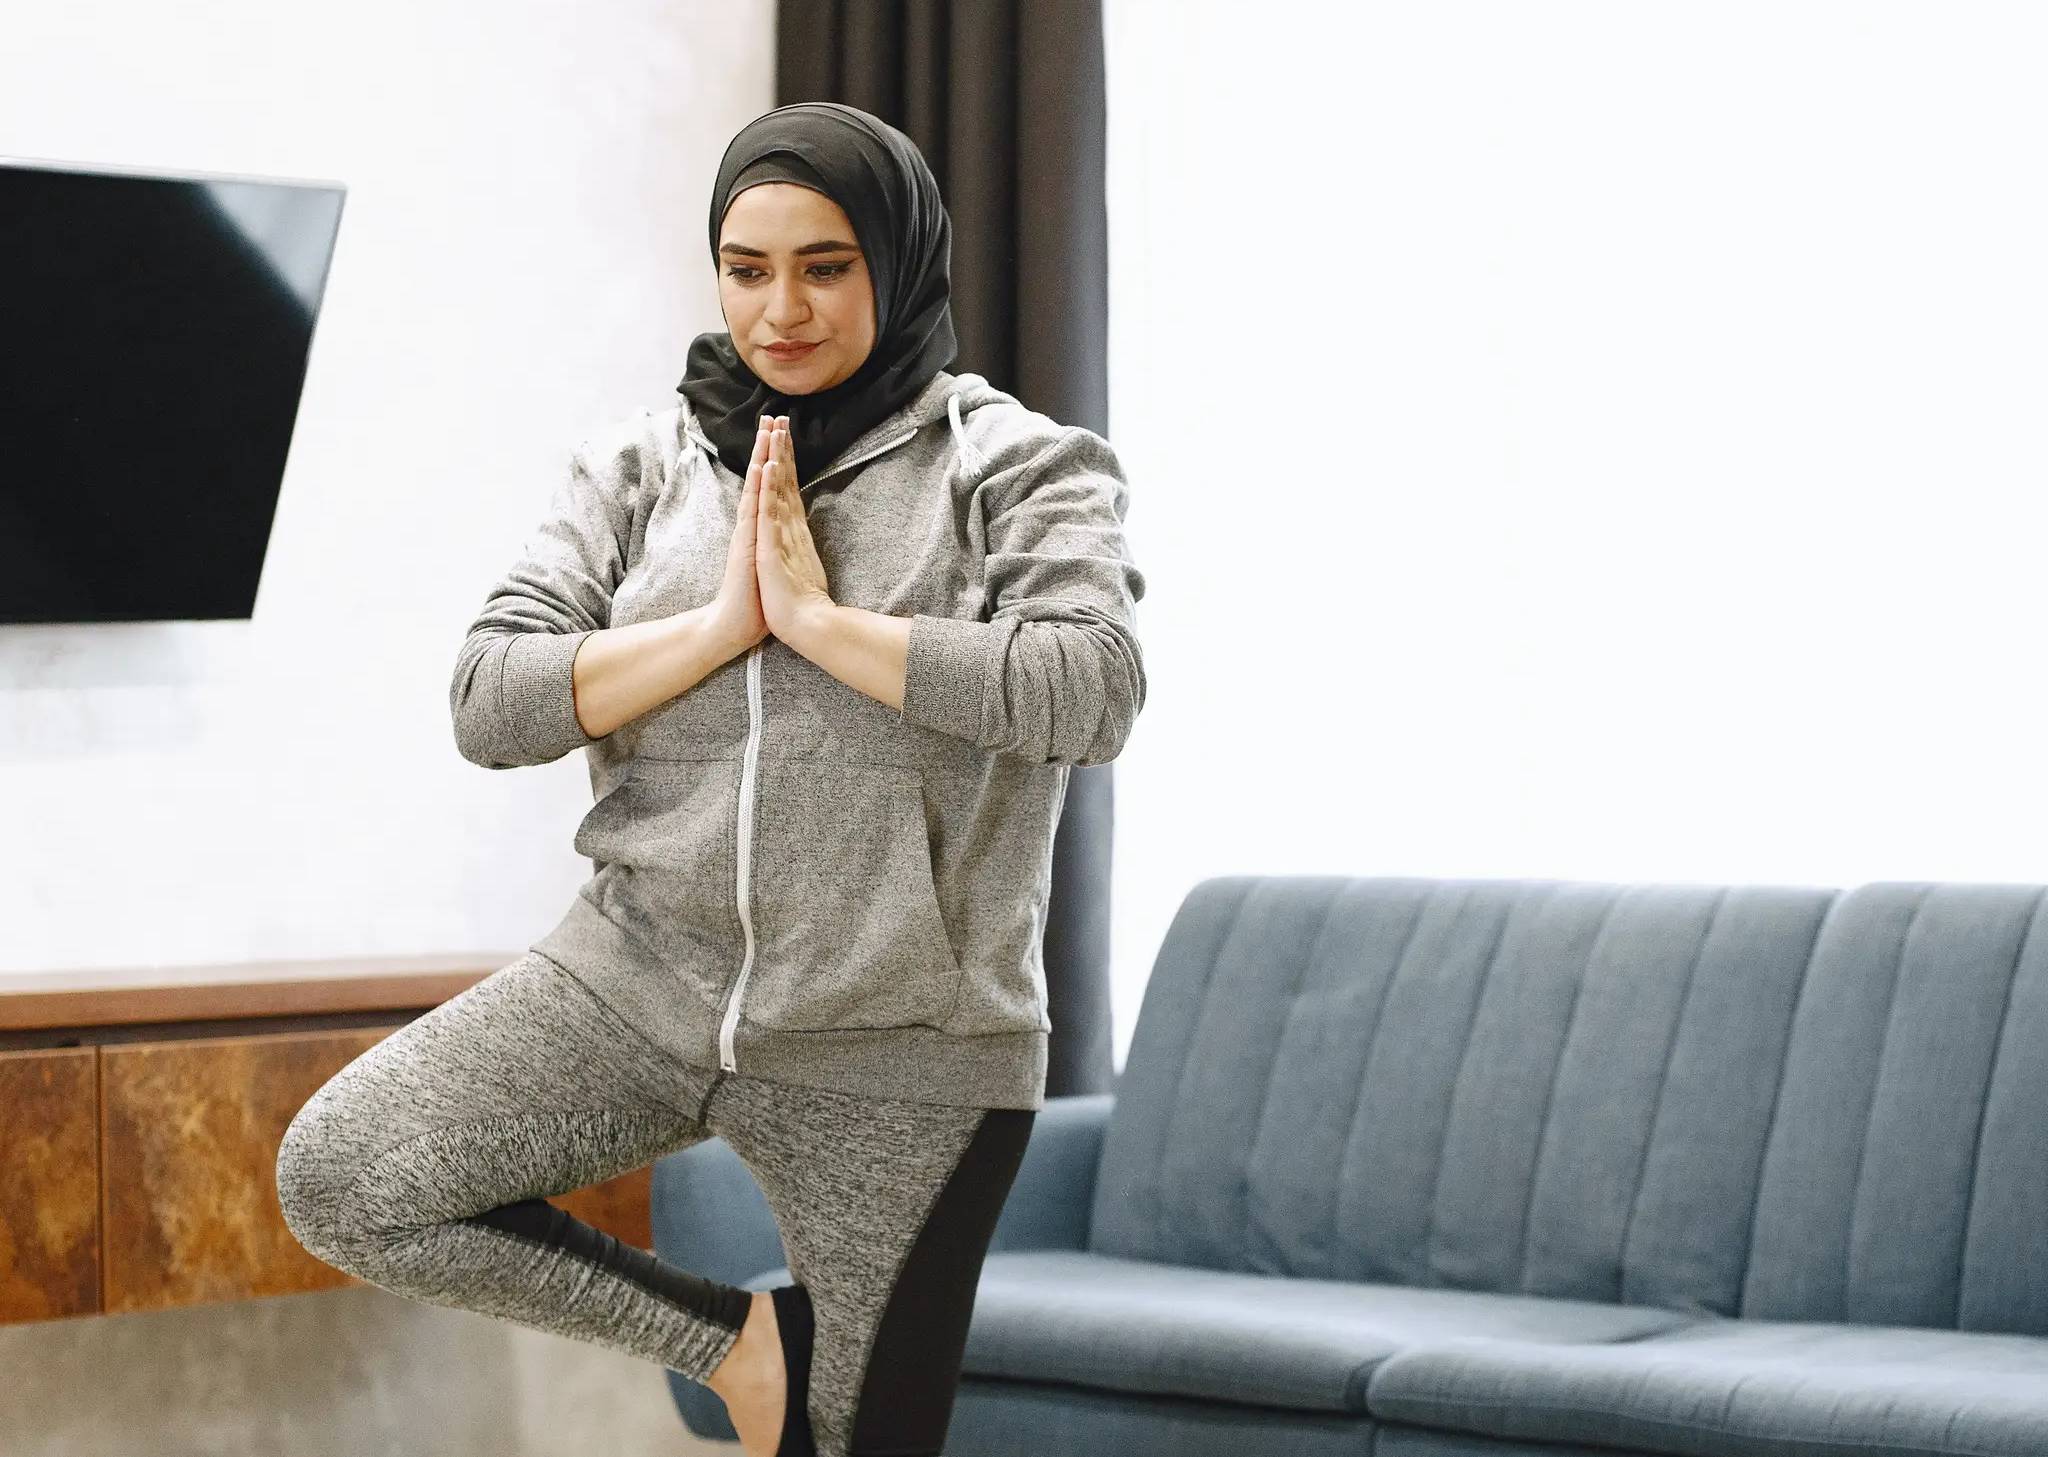 FitJab promotes inclusive exercise for Muslim women